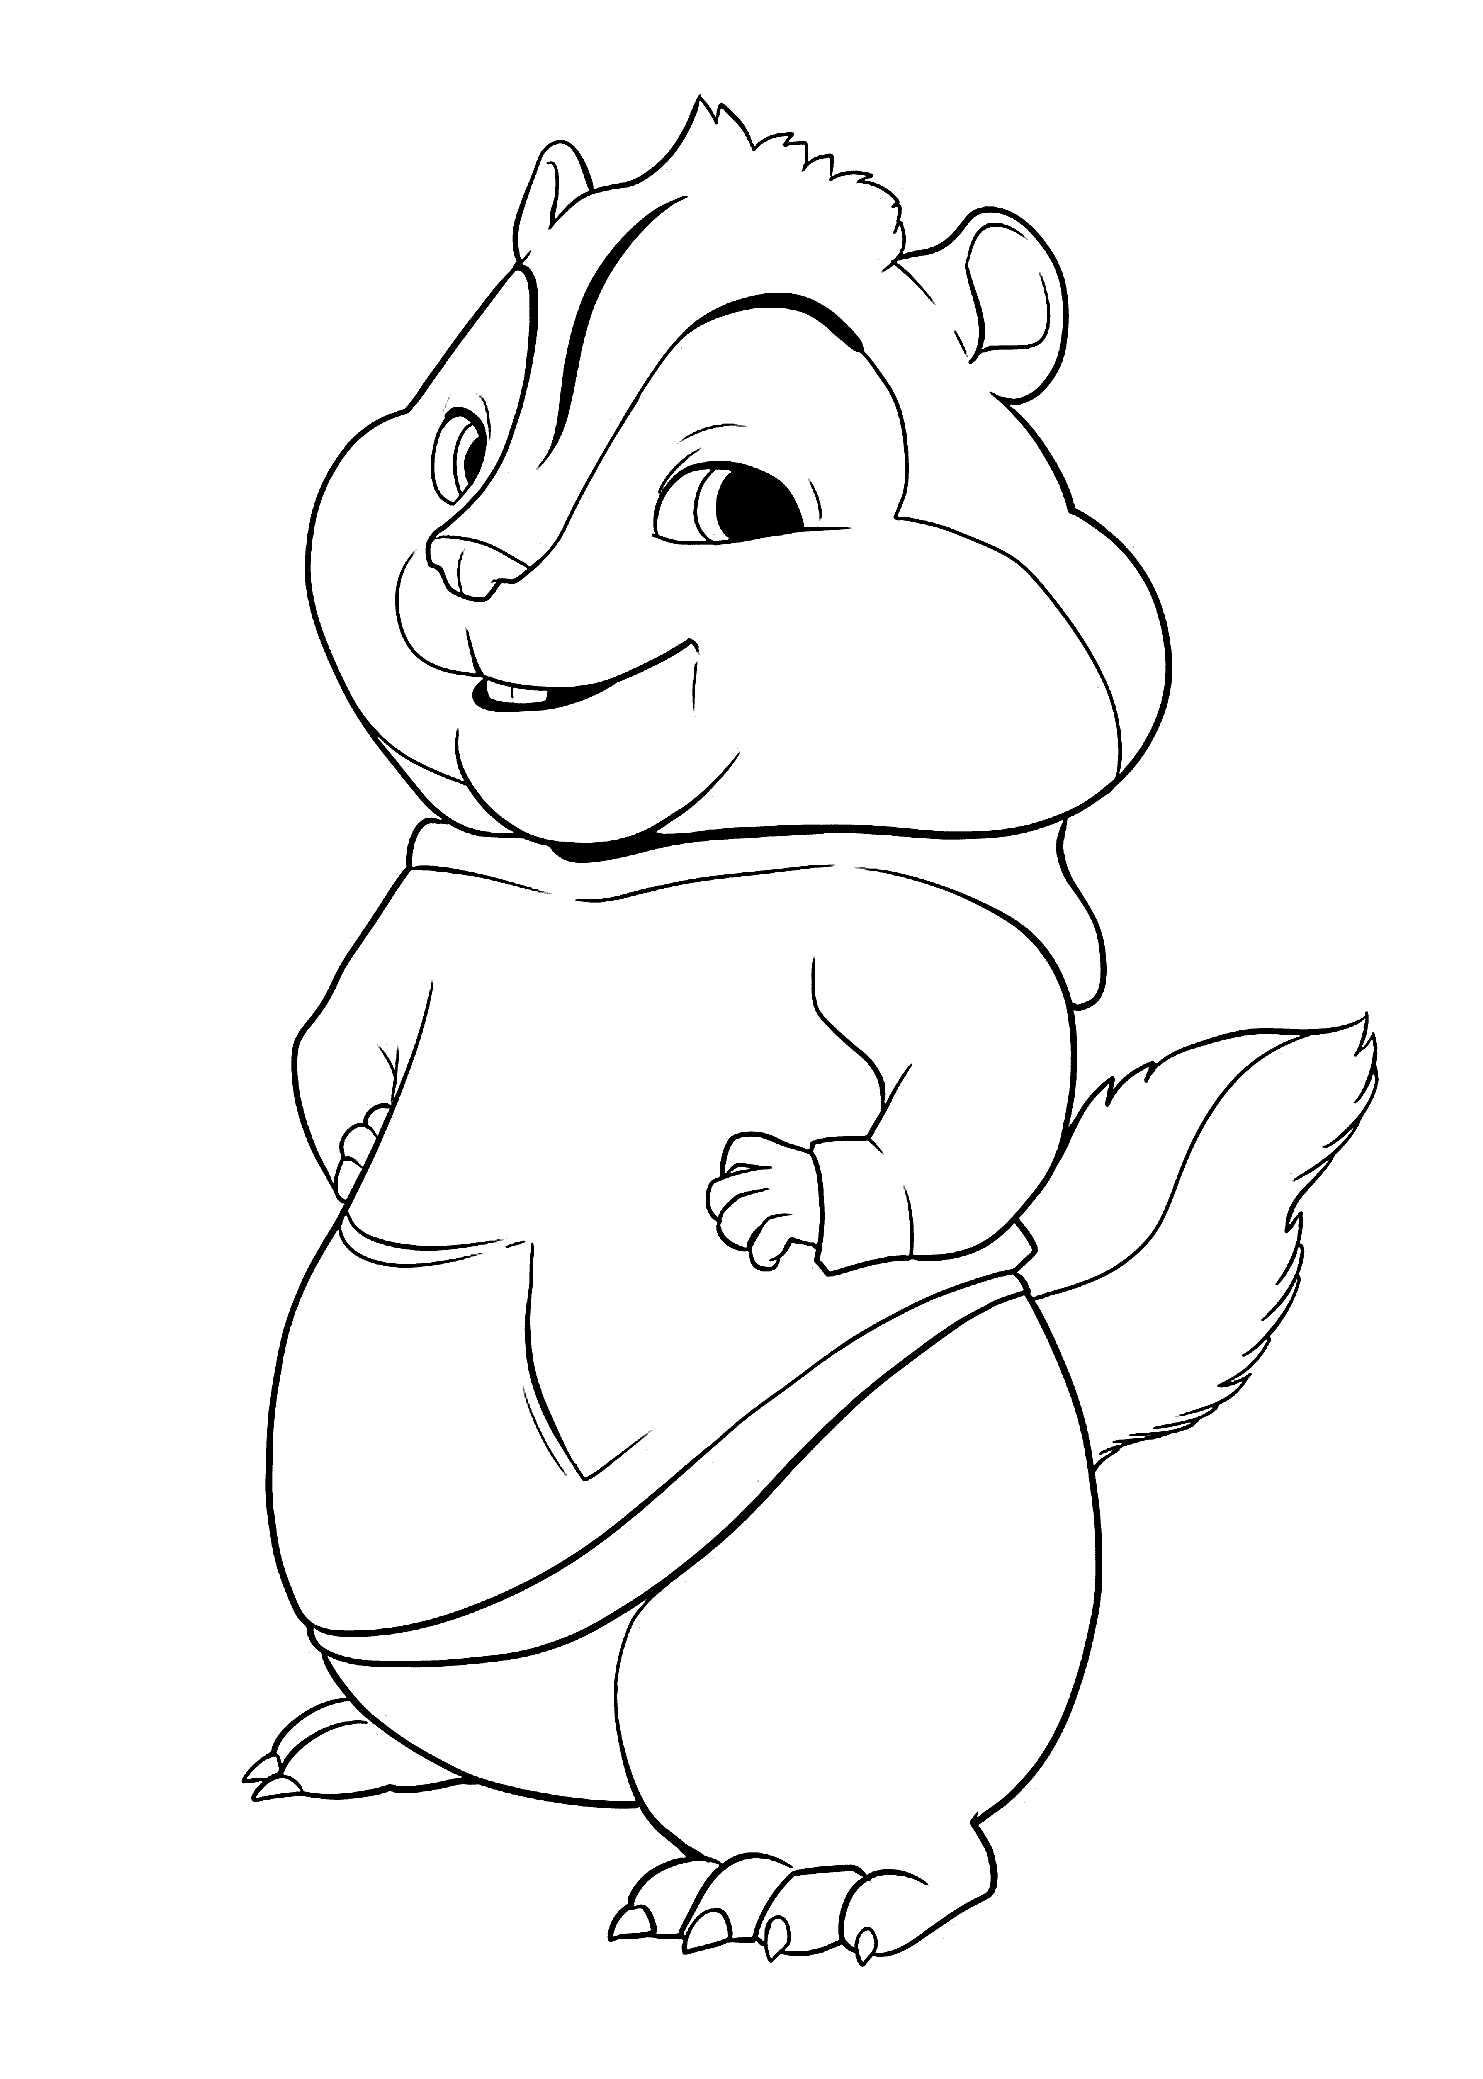 Chipmunk Coloring Pages To Print - Coloring Home